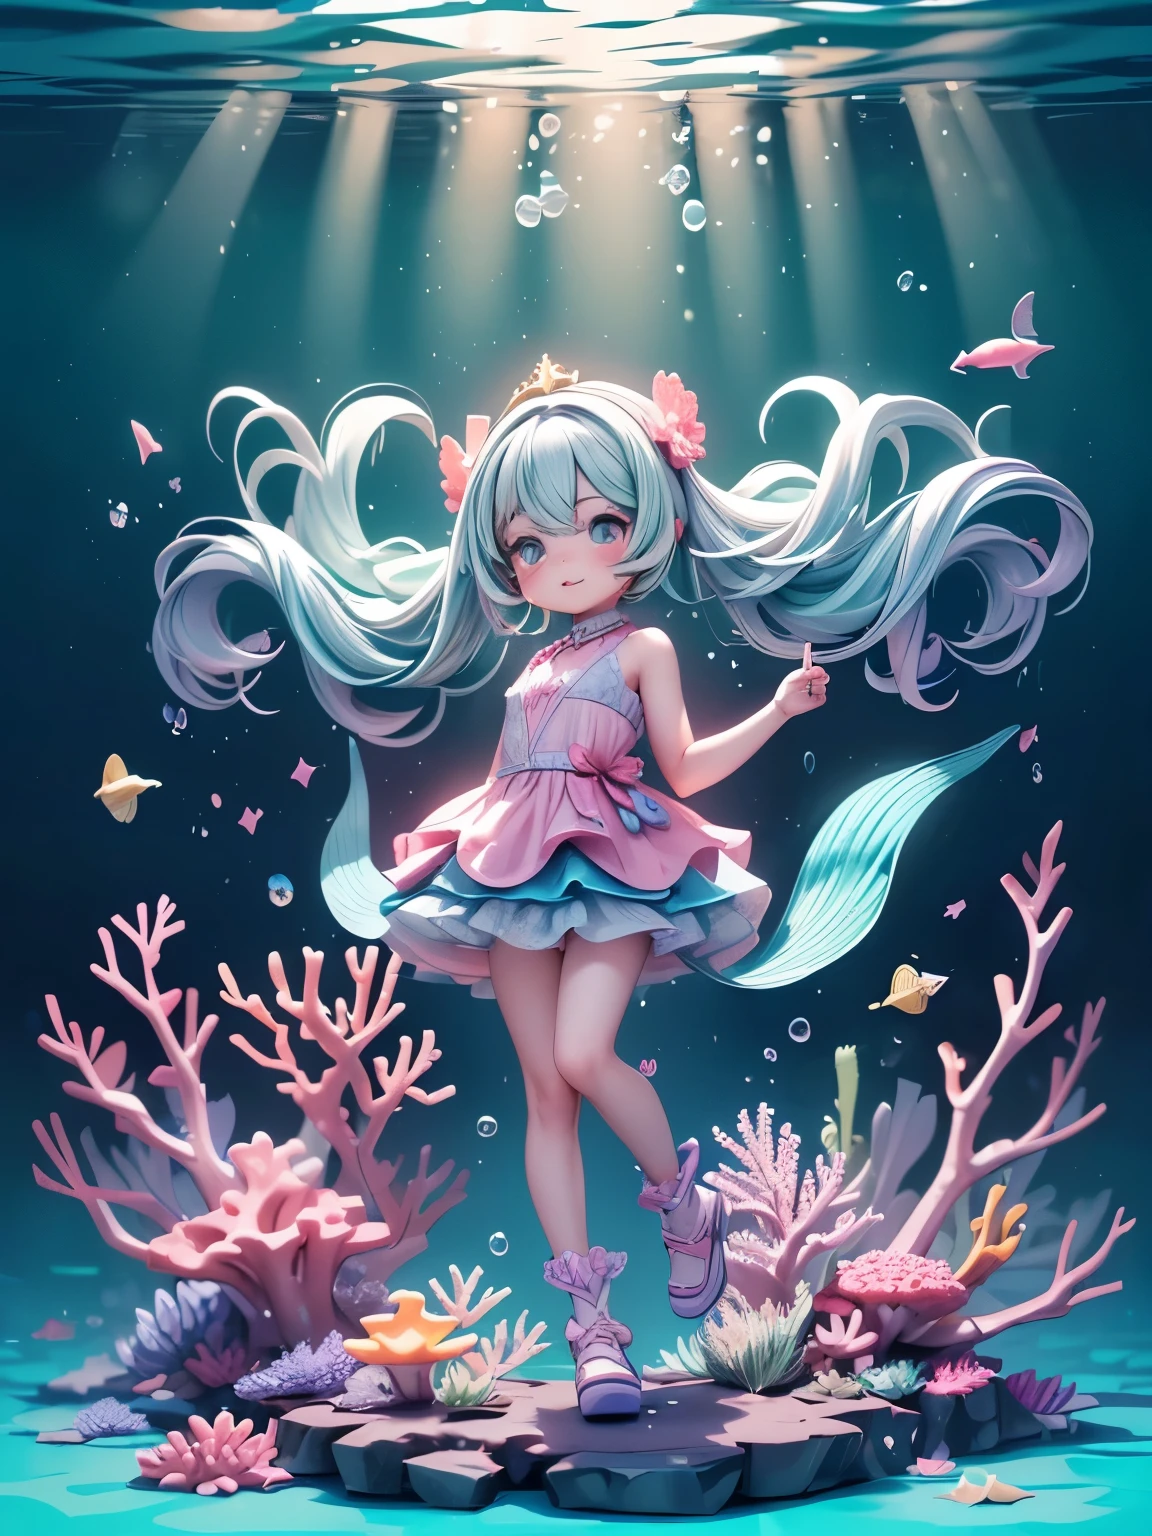 (masterpiece、highest quality、highest quality、Official Art、Beautiful and beautiful:1.2)、(One girl:1.3)Hatsune Miku、Twin tails,Big Breasts,(Tabletop, highest quality, Sharp focus:1.25), (Underwater, Underwater:1.3), One Girl, (Multicolored Hair, Gradient Hair, Two-tone hair, Gray Hair, Bright green hair, Light purple hair:1.3), (Shui Color、Bright green glowing eyes:1.23), (Coral Sea Star Crown:1.2), (Slanted Eyes, purple eye shadow, Long eyelashes, White eyelashes, lips:1.1), (pastelパープルの人fishの鱗, Mermaid End:1.2), (((pose for the audience, Full Body Shot))), Overall light purple, (scenery, Coral cake, Coral Reef, bubble, Seaweed, fish, Glitter, Inner strength:1.2) addition_detailed:0.5, addition_detailed:1, addition_detailed:1, addition_detailed:0, addition_detailed:2, Ink anime, レトロなArt Style, neon_ポップArt Style, Art Style, Pastor 1, Colorful mix, Multicolored Hair, Wavy Hair, (Korean webtoon girls, Big eyes, Shadow lipstick, cute face, Oval Face), Hmph, ((cute, cute, cute, anime, pastel)), Kawaii Tech, pastelカラー, cute, cute colors